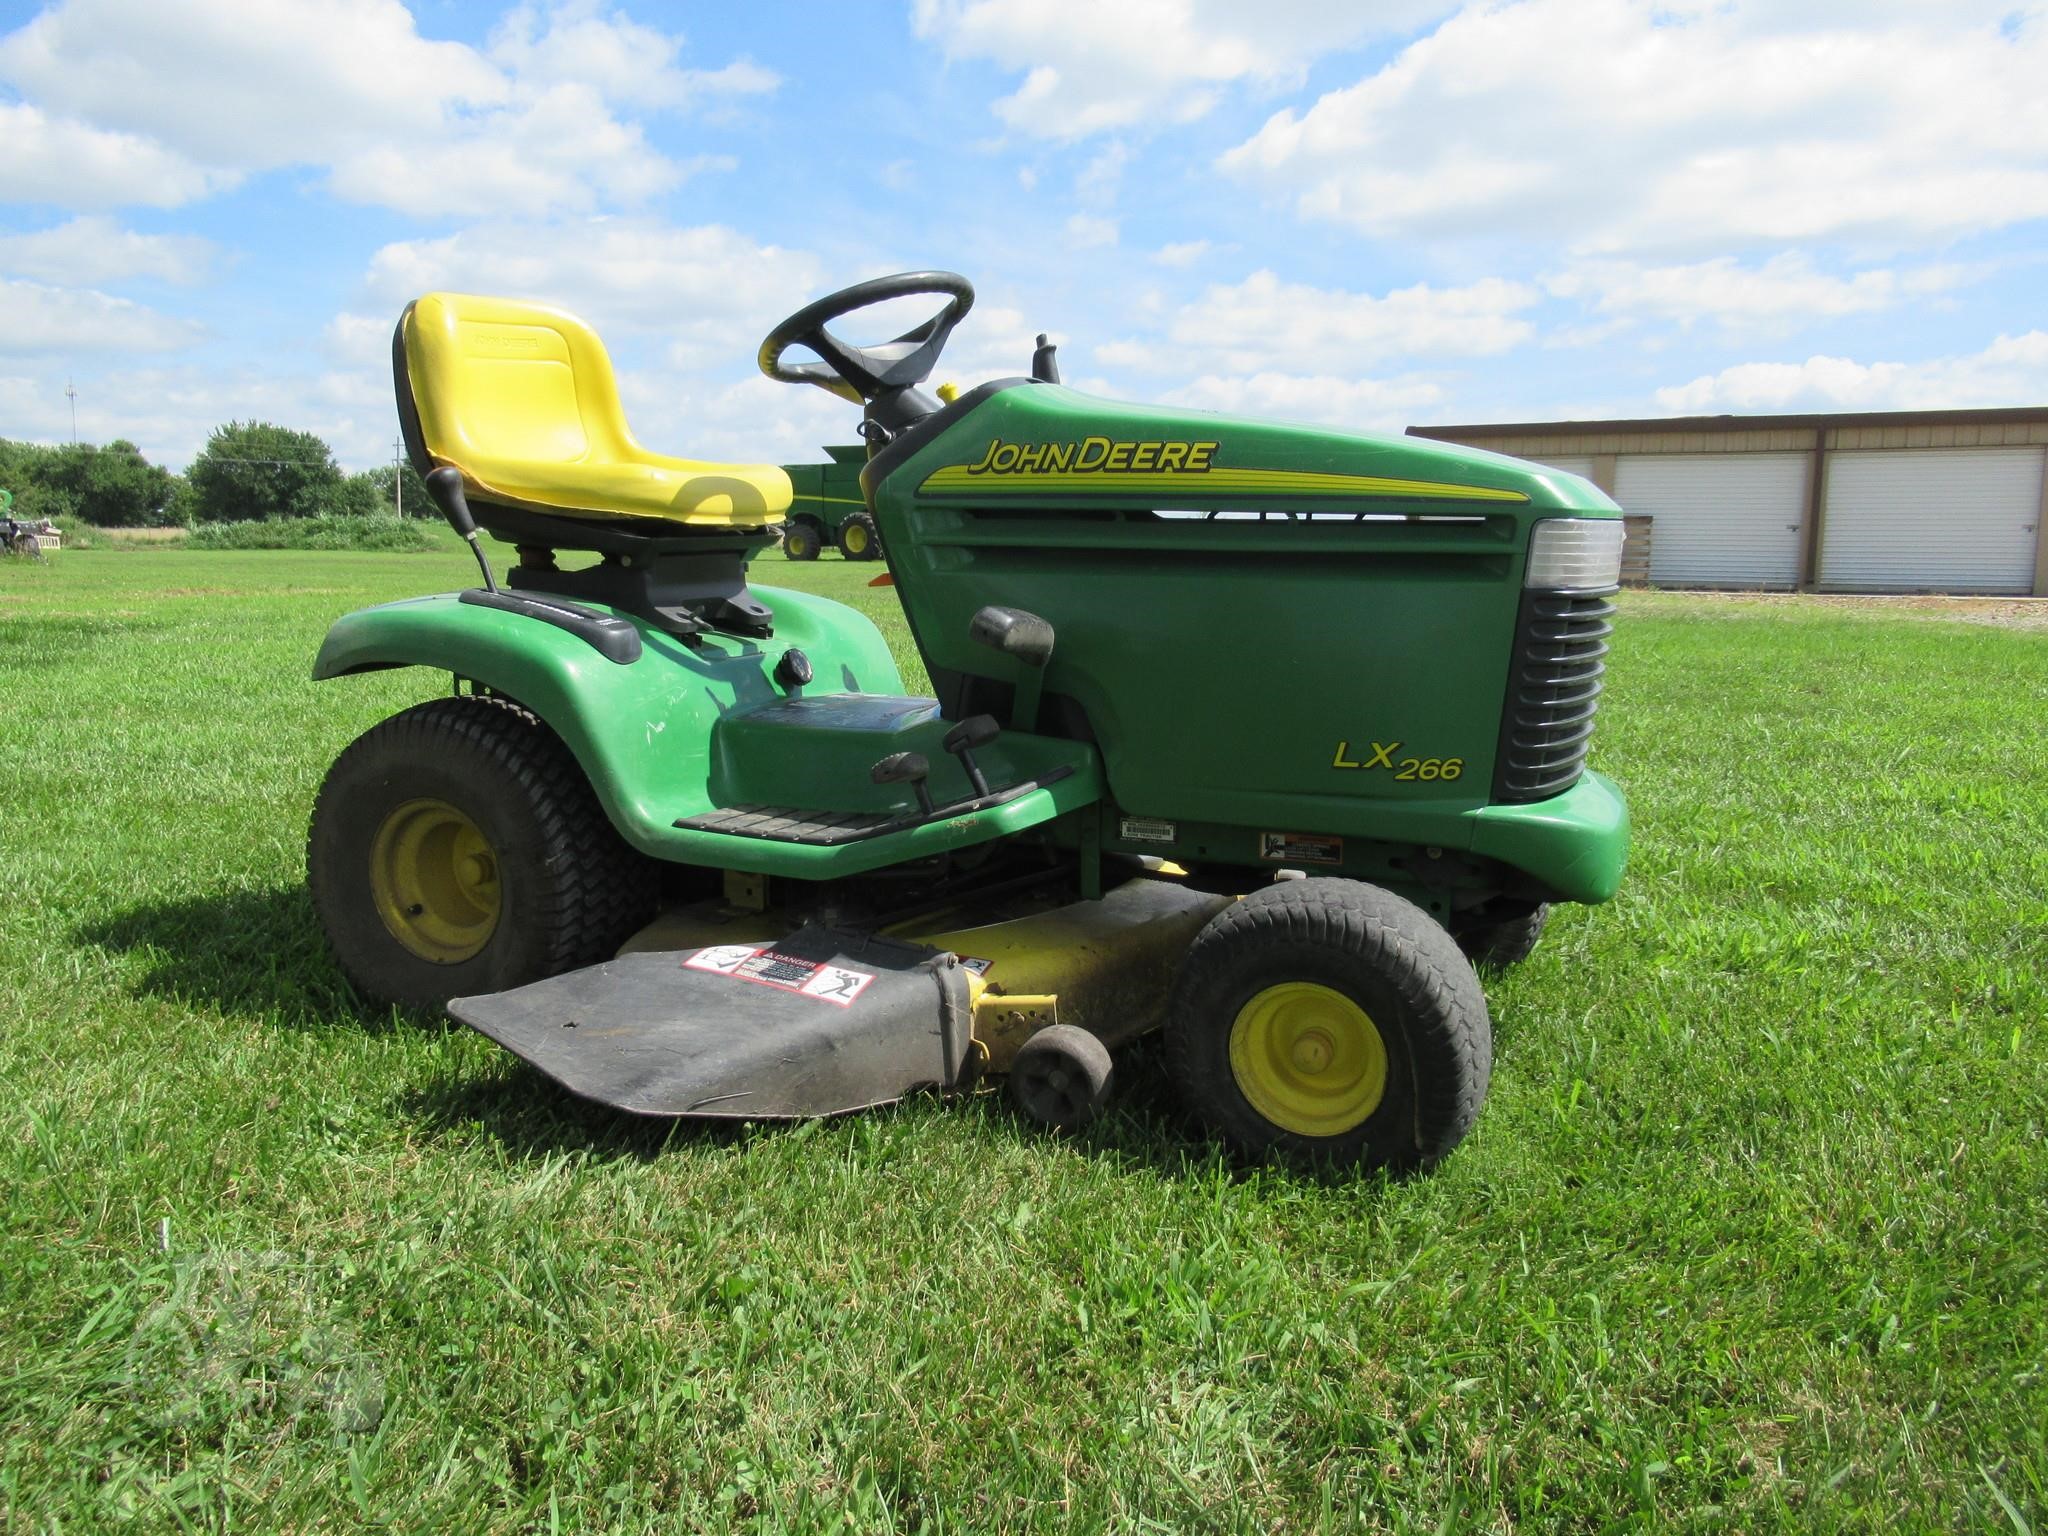 John Deere Lx266 Auction Results - 11 Listings Tractorhousecom - Page 1 Of 1